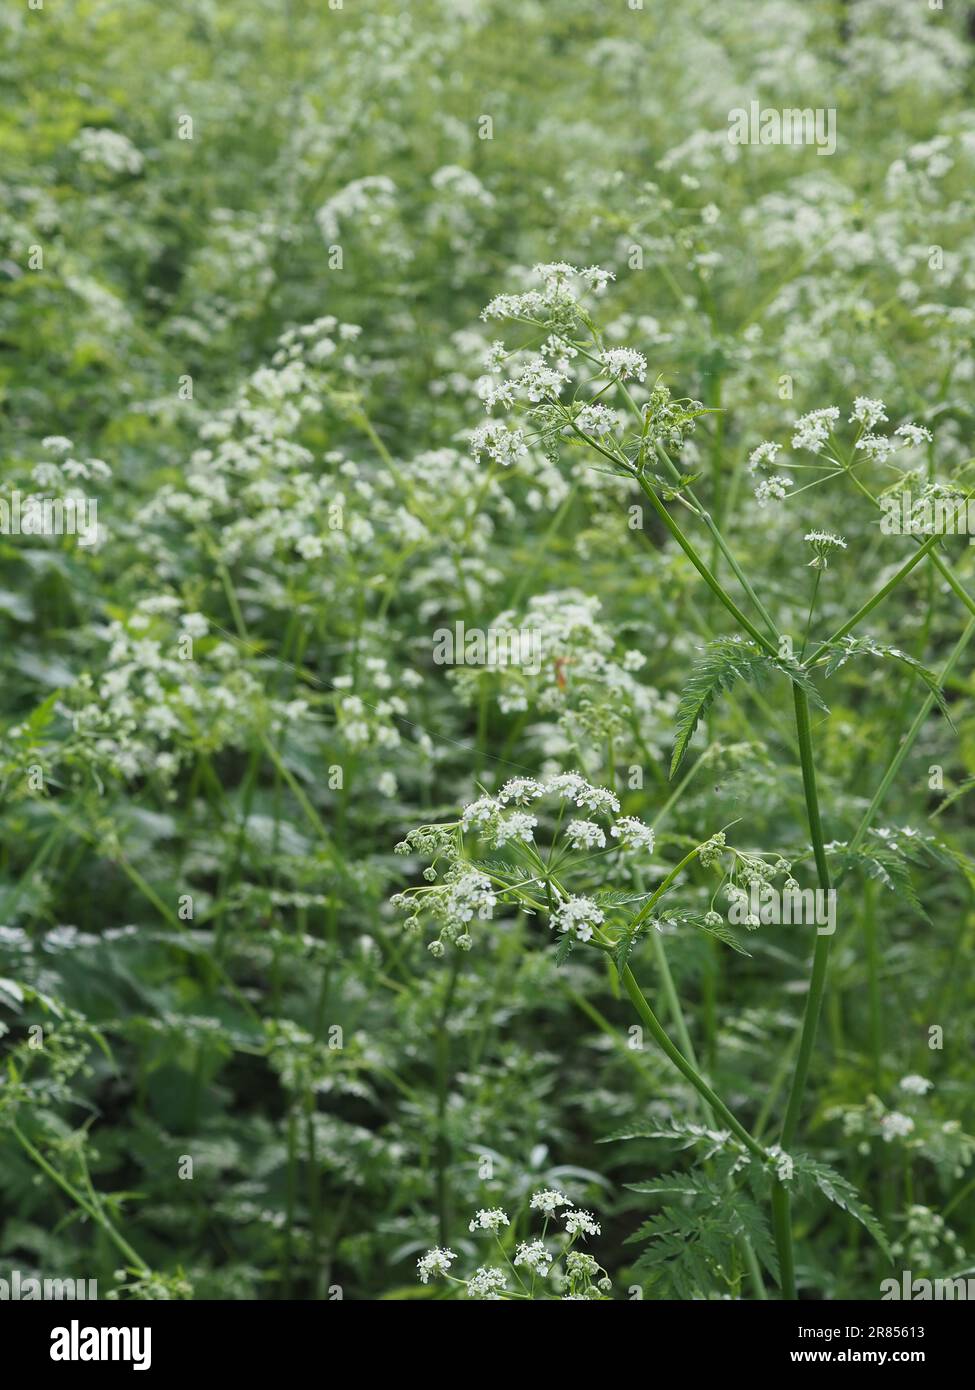 Close up of a patch of beautiful wild cow parsley (Anthriscus sylvestris) showing white flowers & green foliage in the British countryside in spring Stock Photo